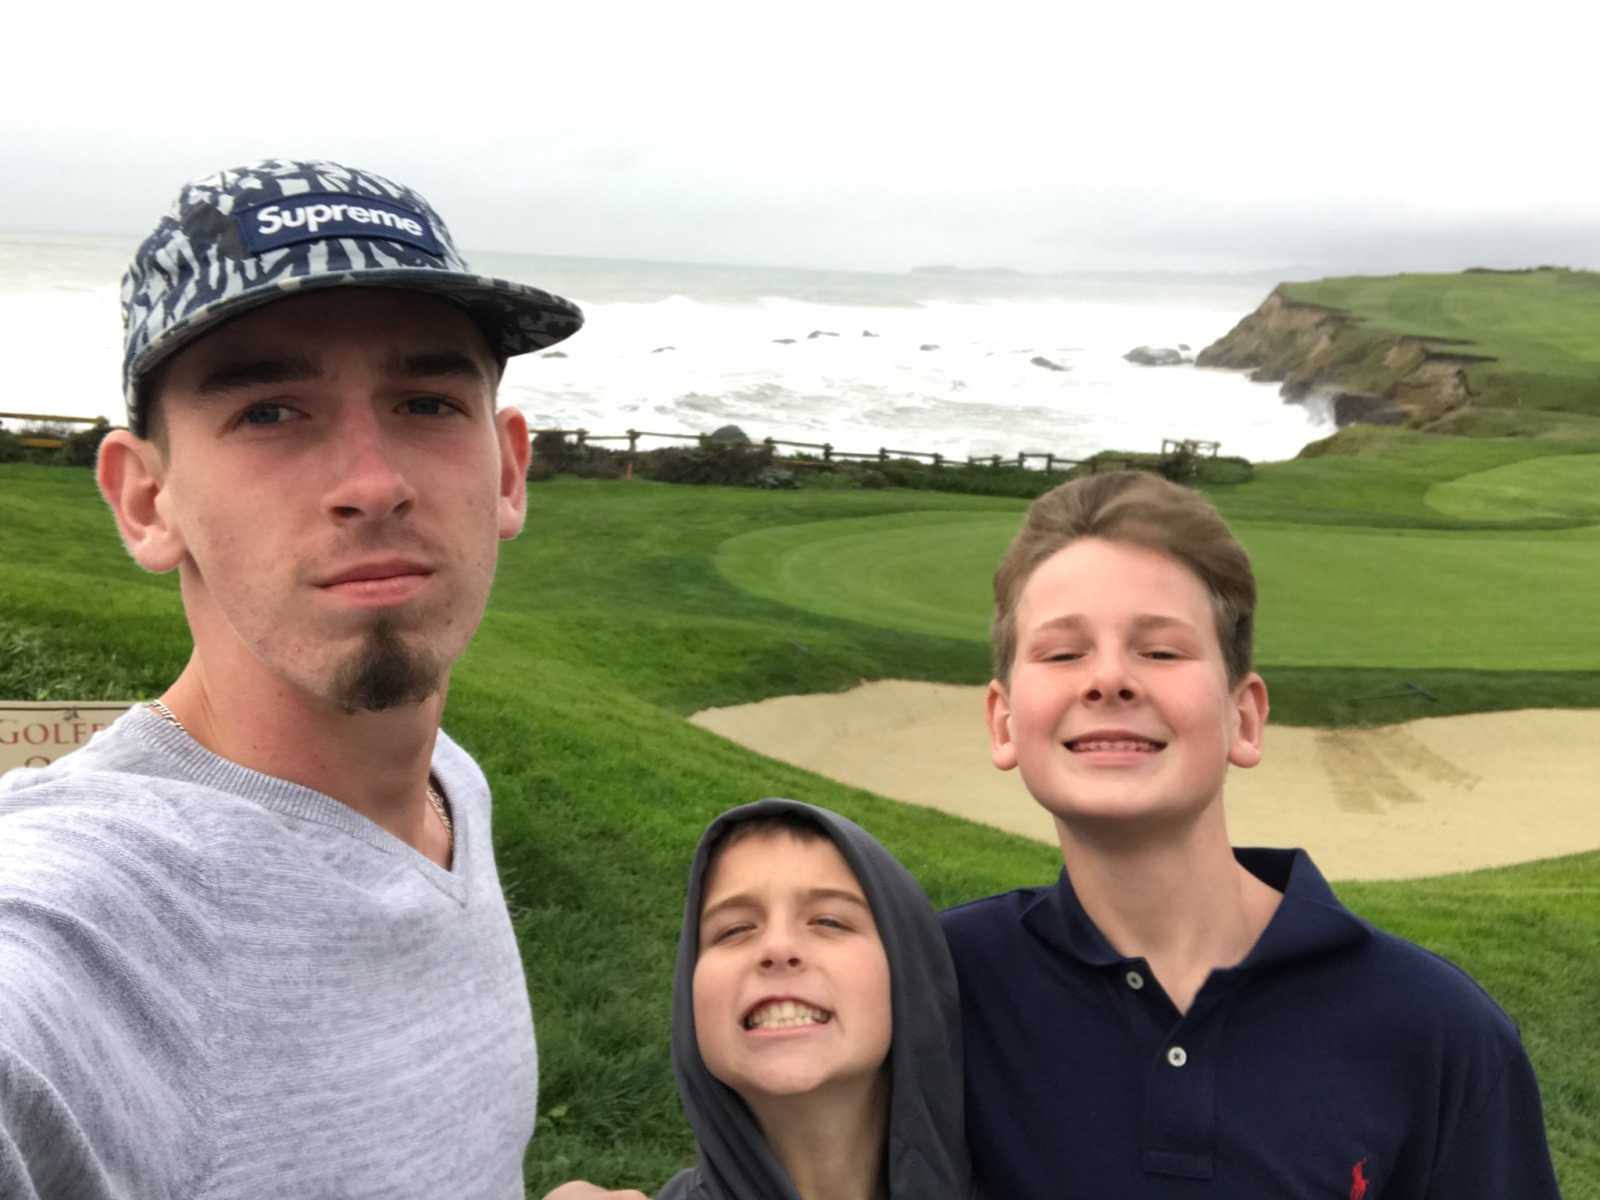 Two brothers who survived Parkand school shooting take selfie with younger brother on golf course